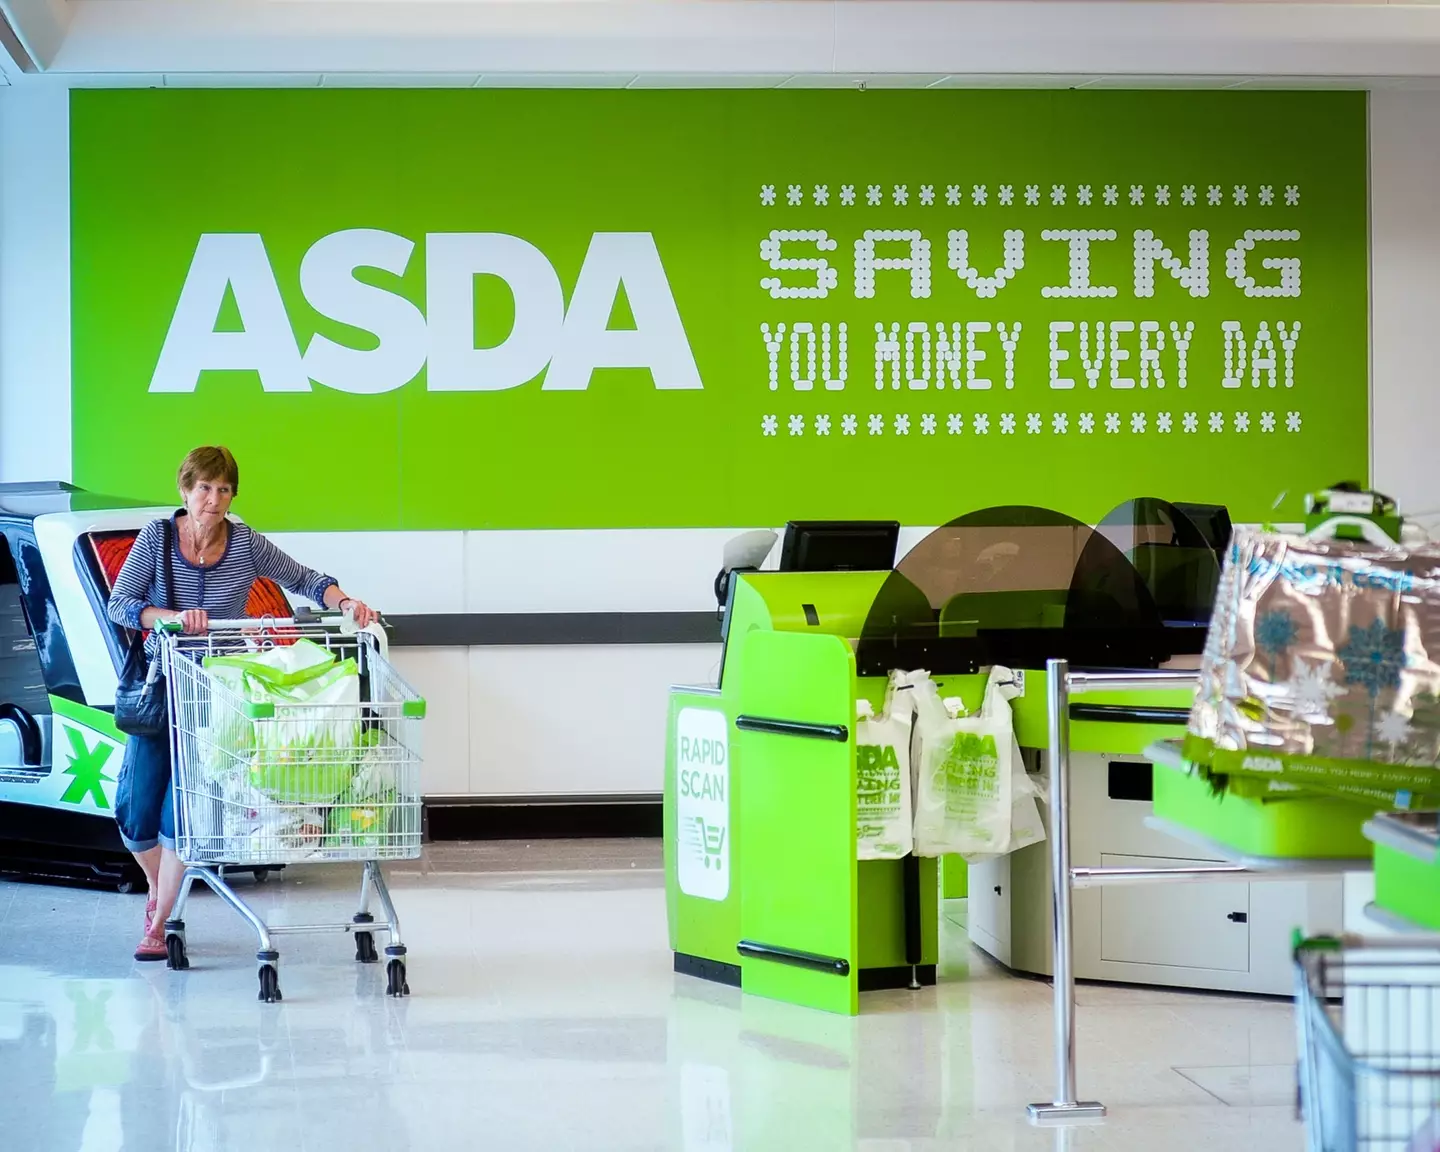 Blue Light Card holders can get 10 percent off their shop at Asda.